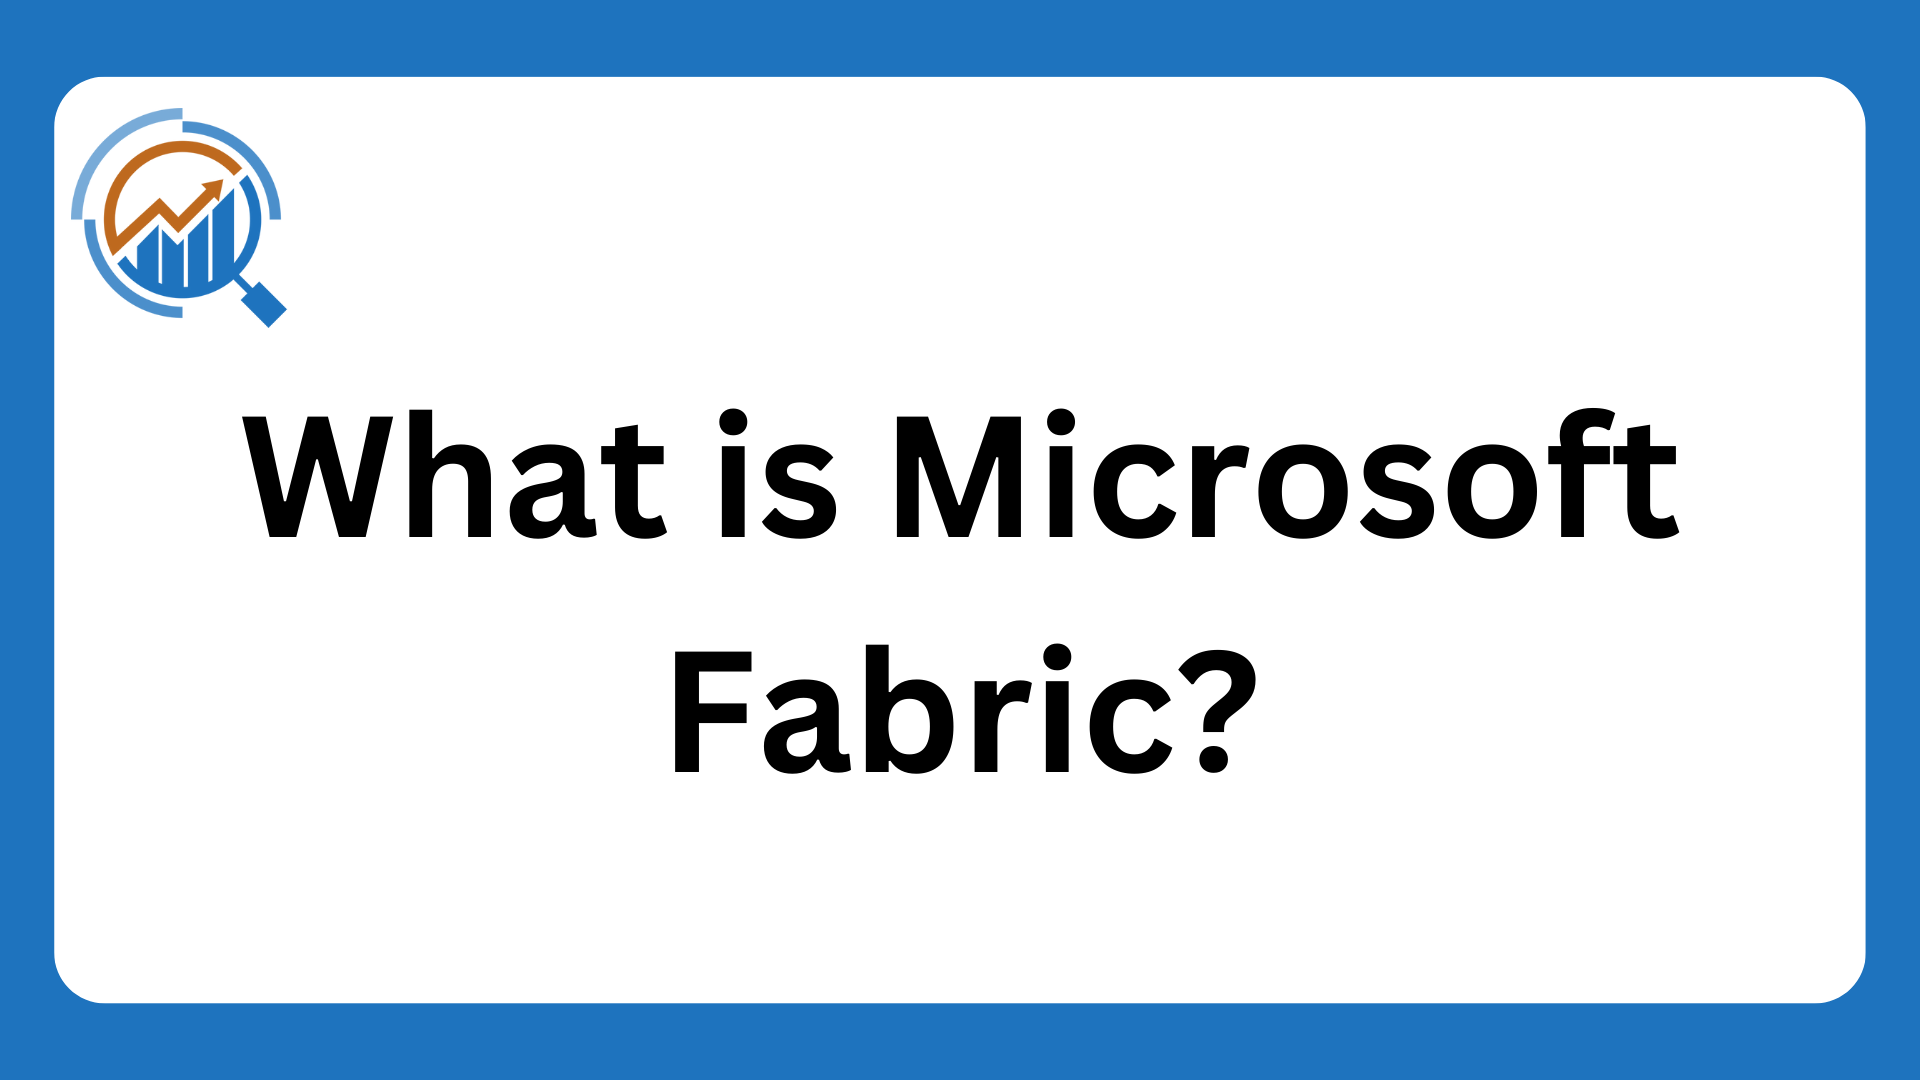 What is Micrsoft Fabric